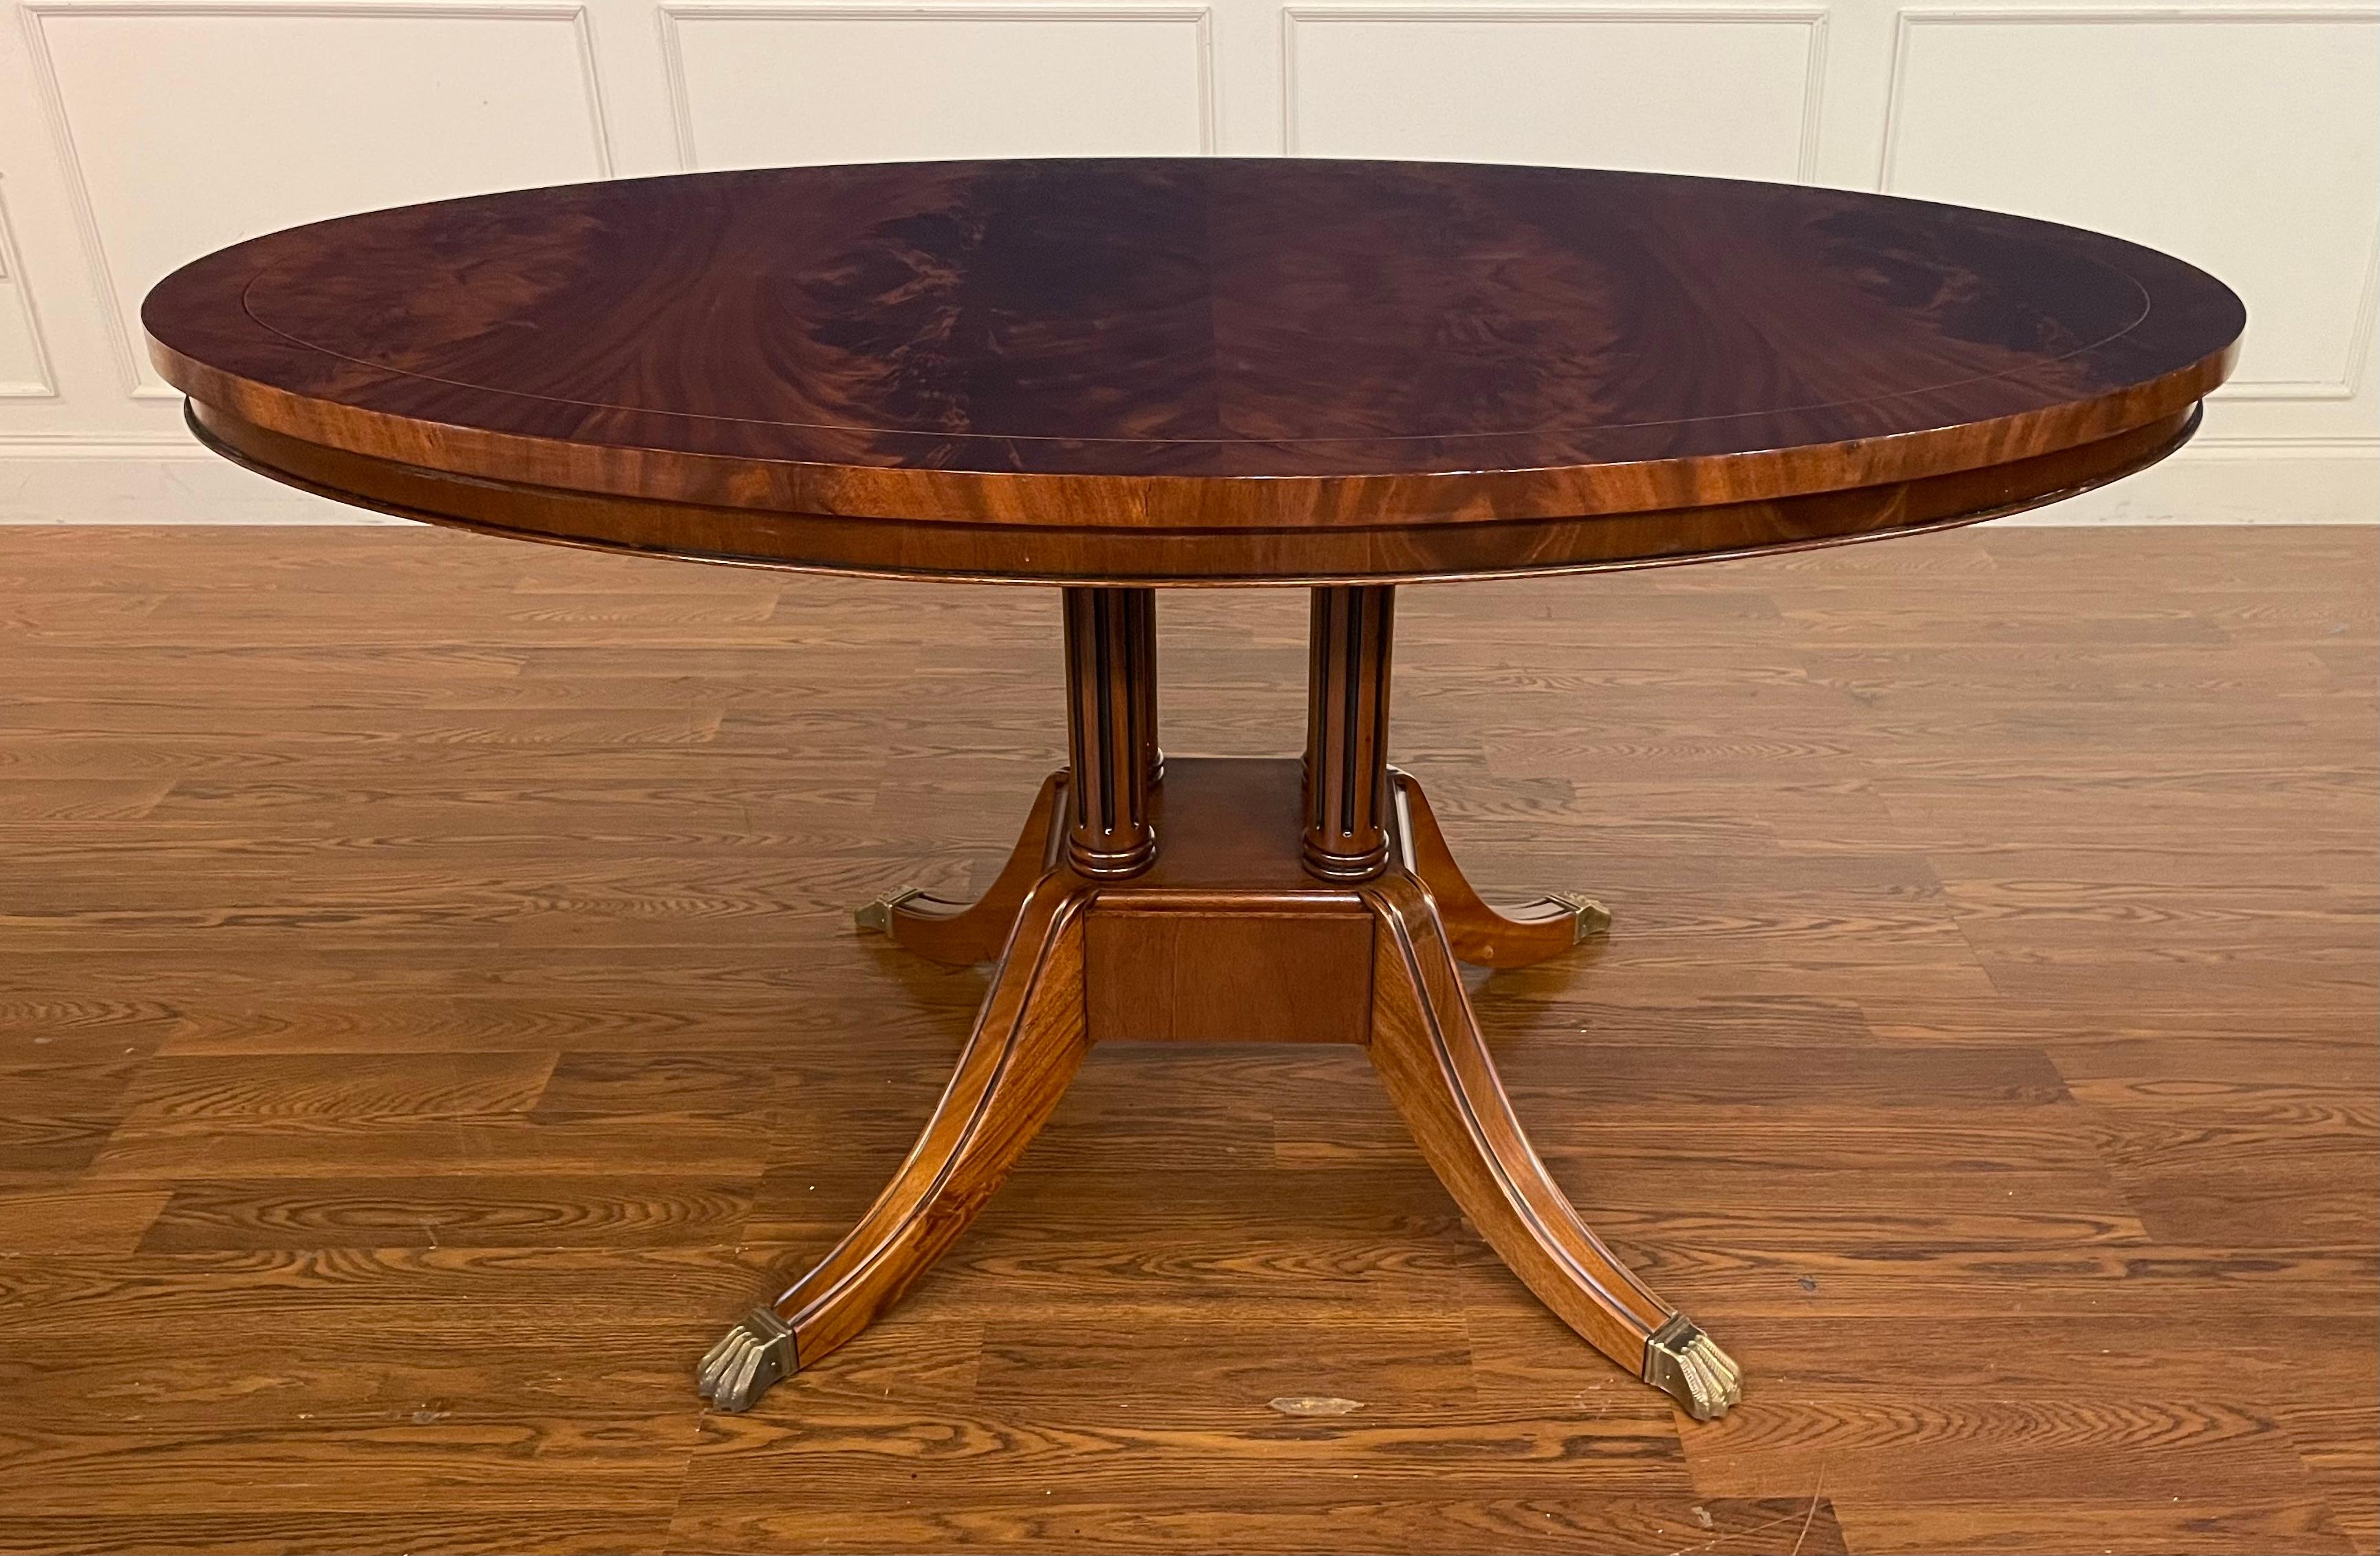 This is an oval mahogany table made-to-order in the Leighton Hall shop in Suwanee, Georgia. This table is ideal as a breakfast table, dining table for an apartment, game table, or foyer table. It features a field of booked and butted swirly crotch